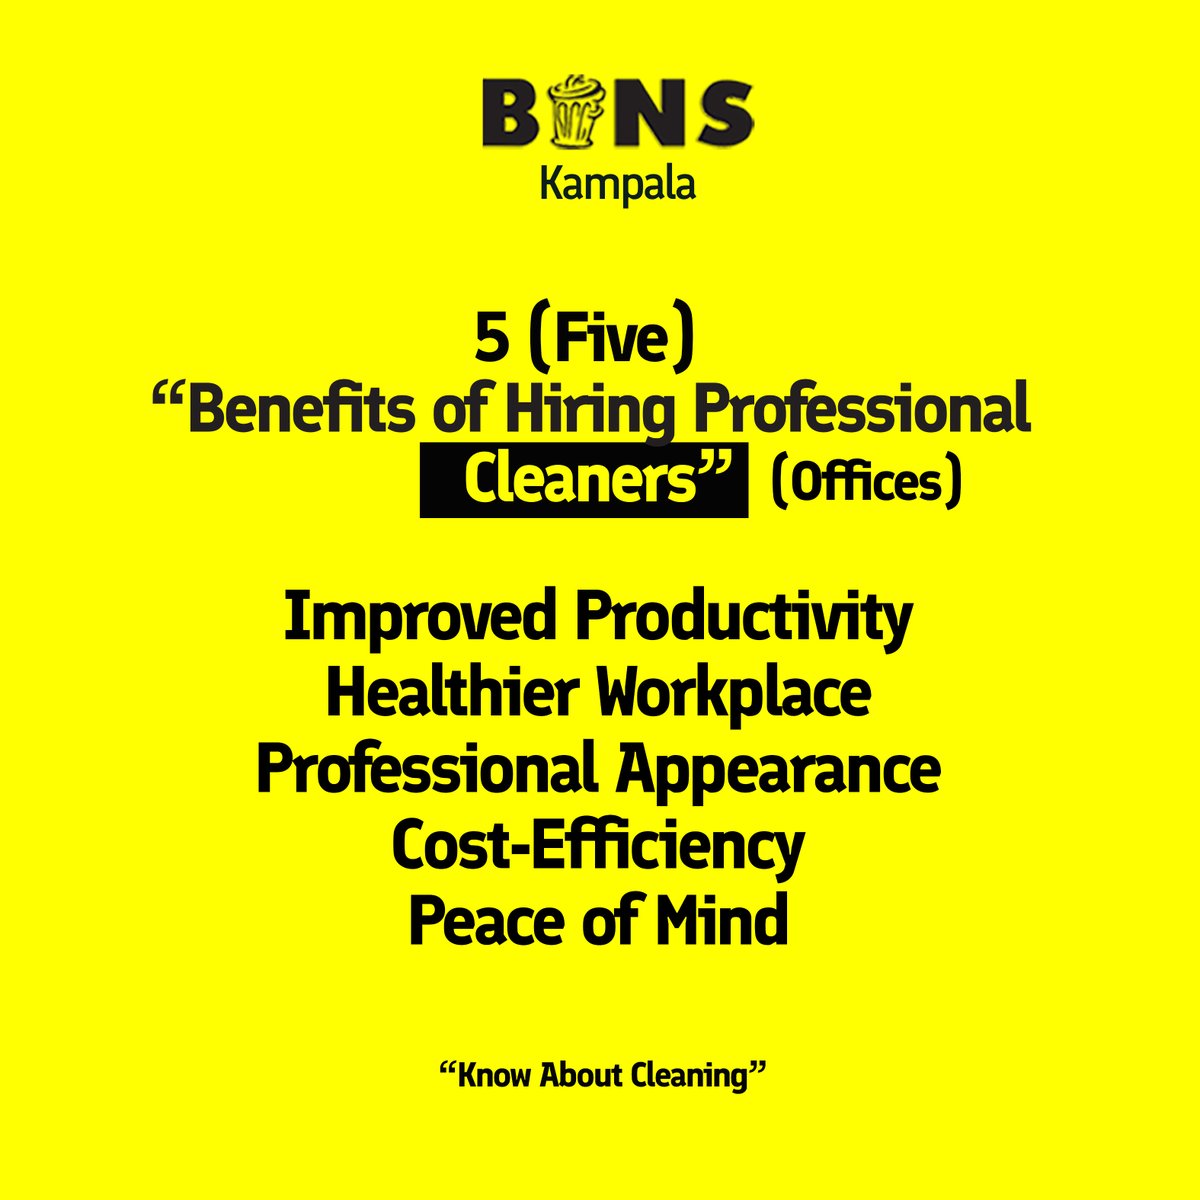 Be effective, become unstoppable. Here's some 5 benefits of hiring professional cleaning services for your business, or organisation. #KnowHygiene #KnowAboutCleaning #BinsKampala #ProfessionalCleaning